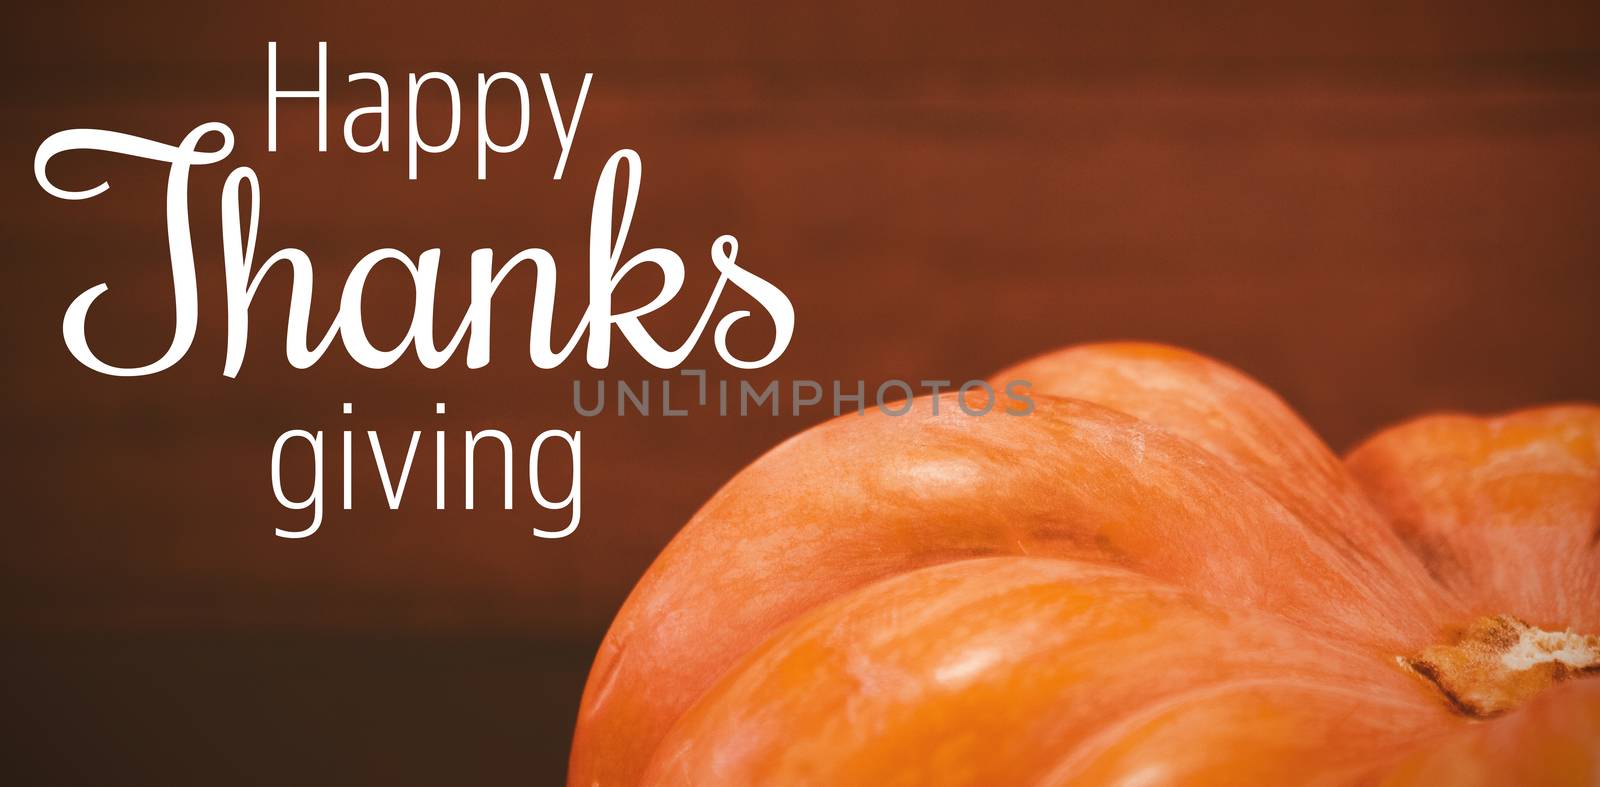 Thanksgiving greeting text against cropped image of pumpkin during halloween